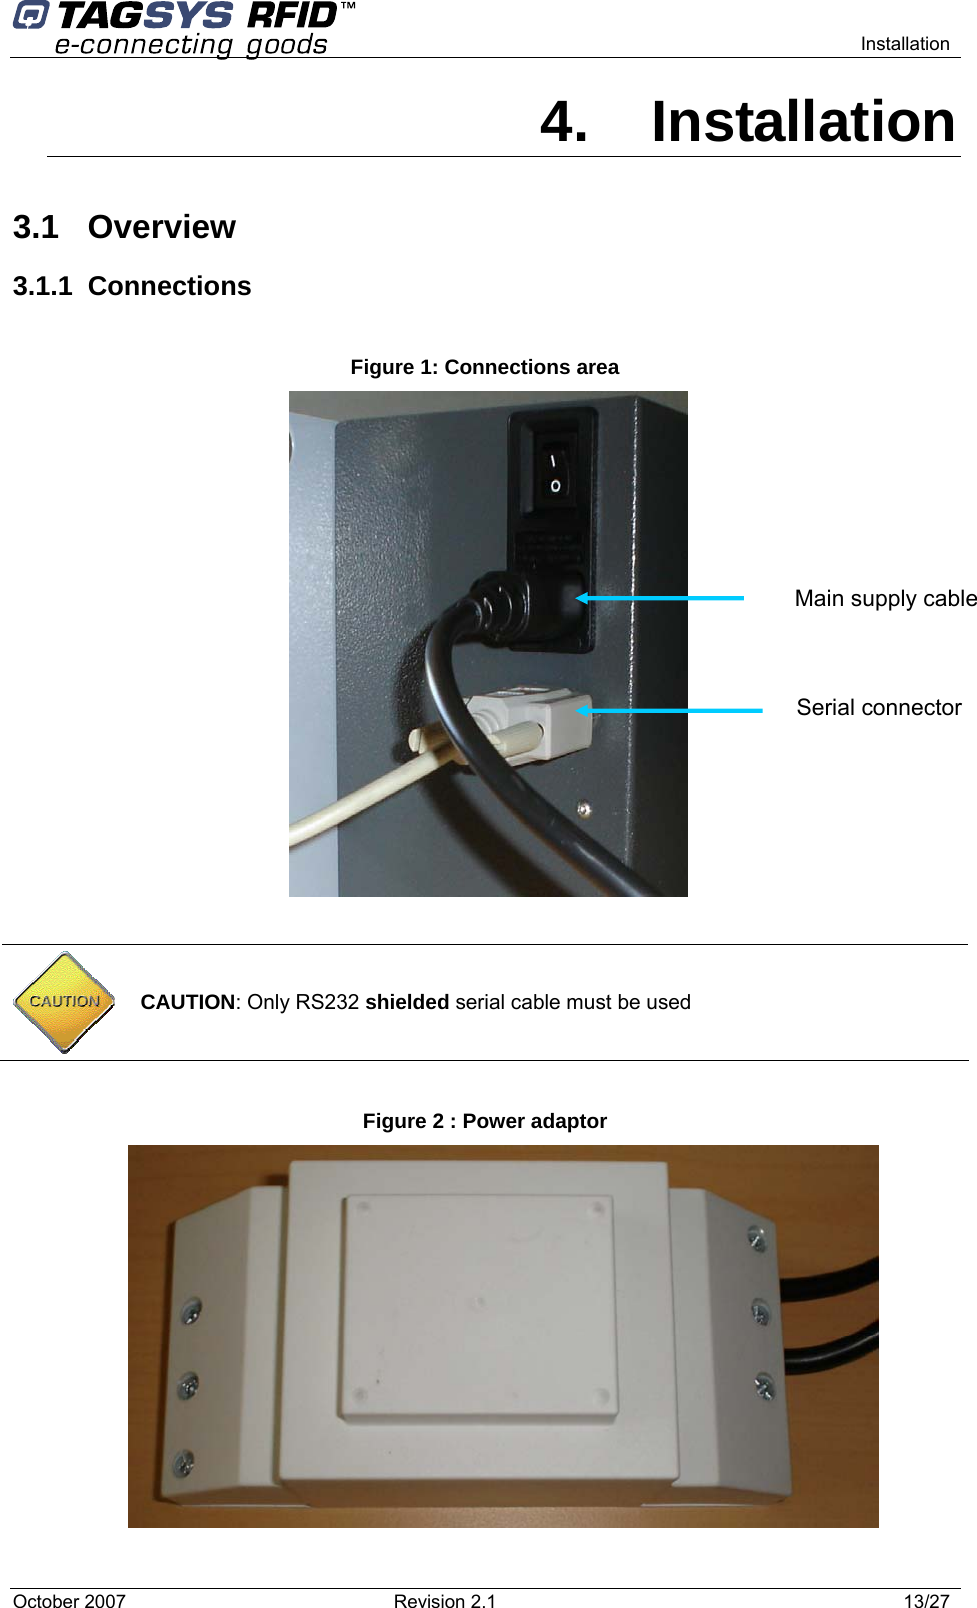    Installation 4. Installation 3.1 Overview 3.1.1 Connections  Figure 1: Connections area    Main supply cable Serial connector   CAUTION: Only RS232 shielded serial cable must be used  Figure 2 : Power adaptor October 2007  Revision 2.1  13/27 